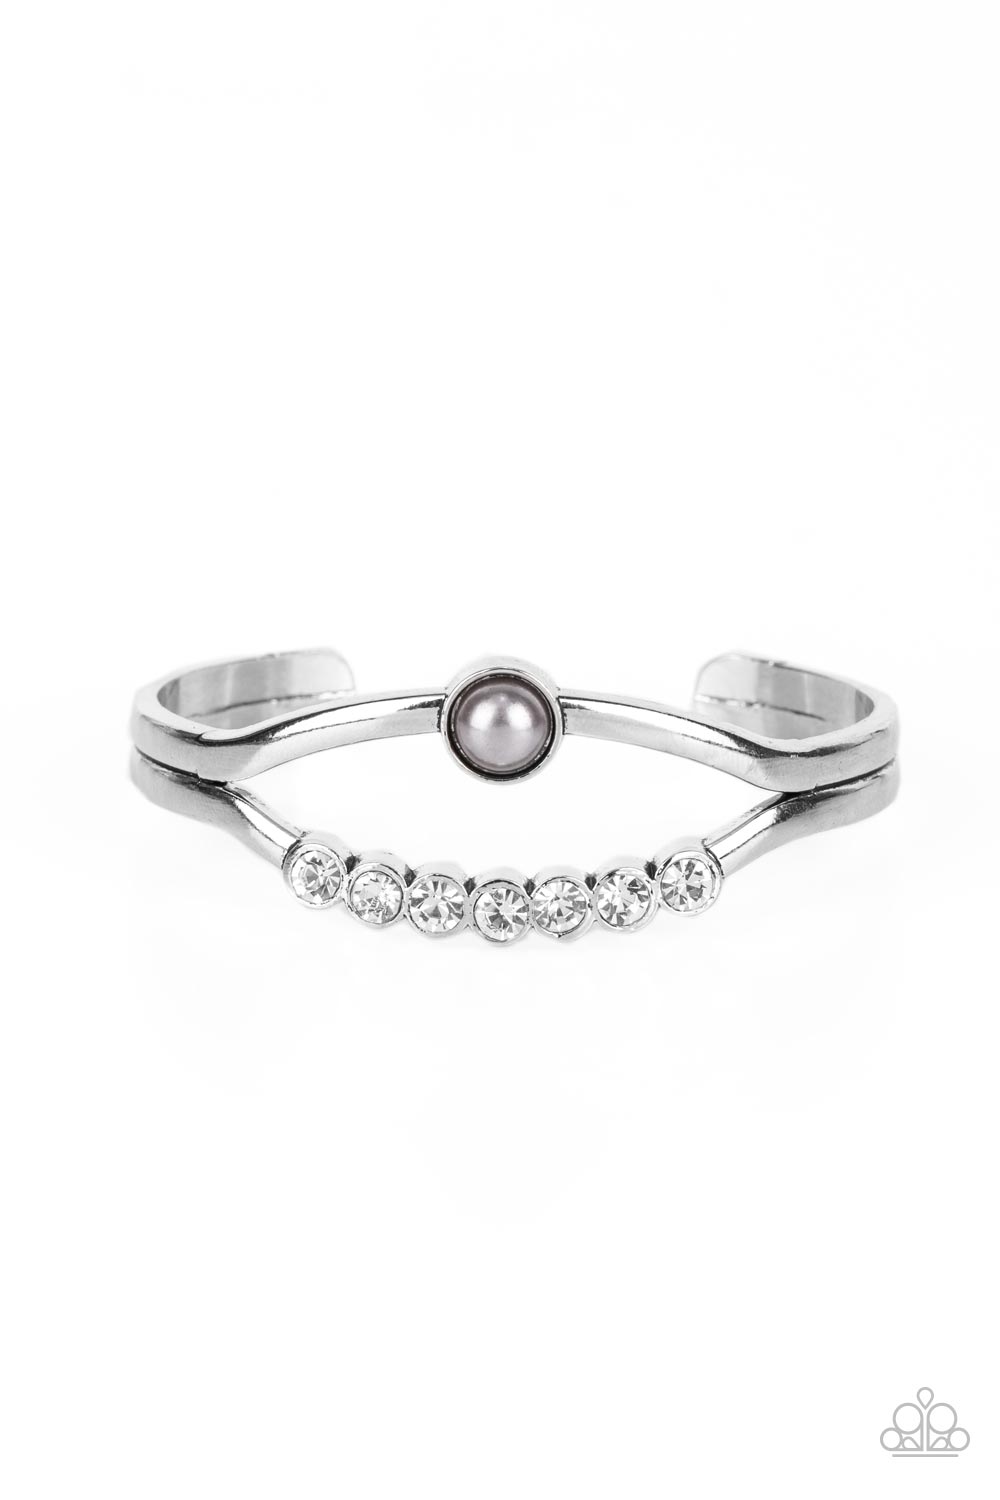 A row of white rhinestones and a solitaire silver pearl adorn the layered center of a classic silver cuff, creating a timeless piece around the wrist.